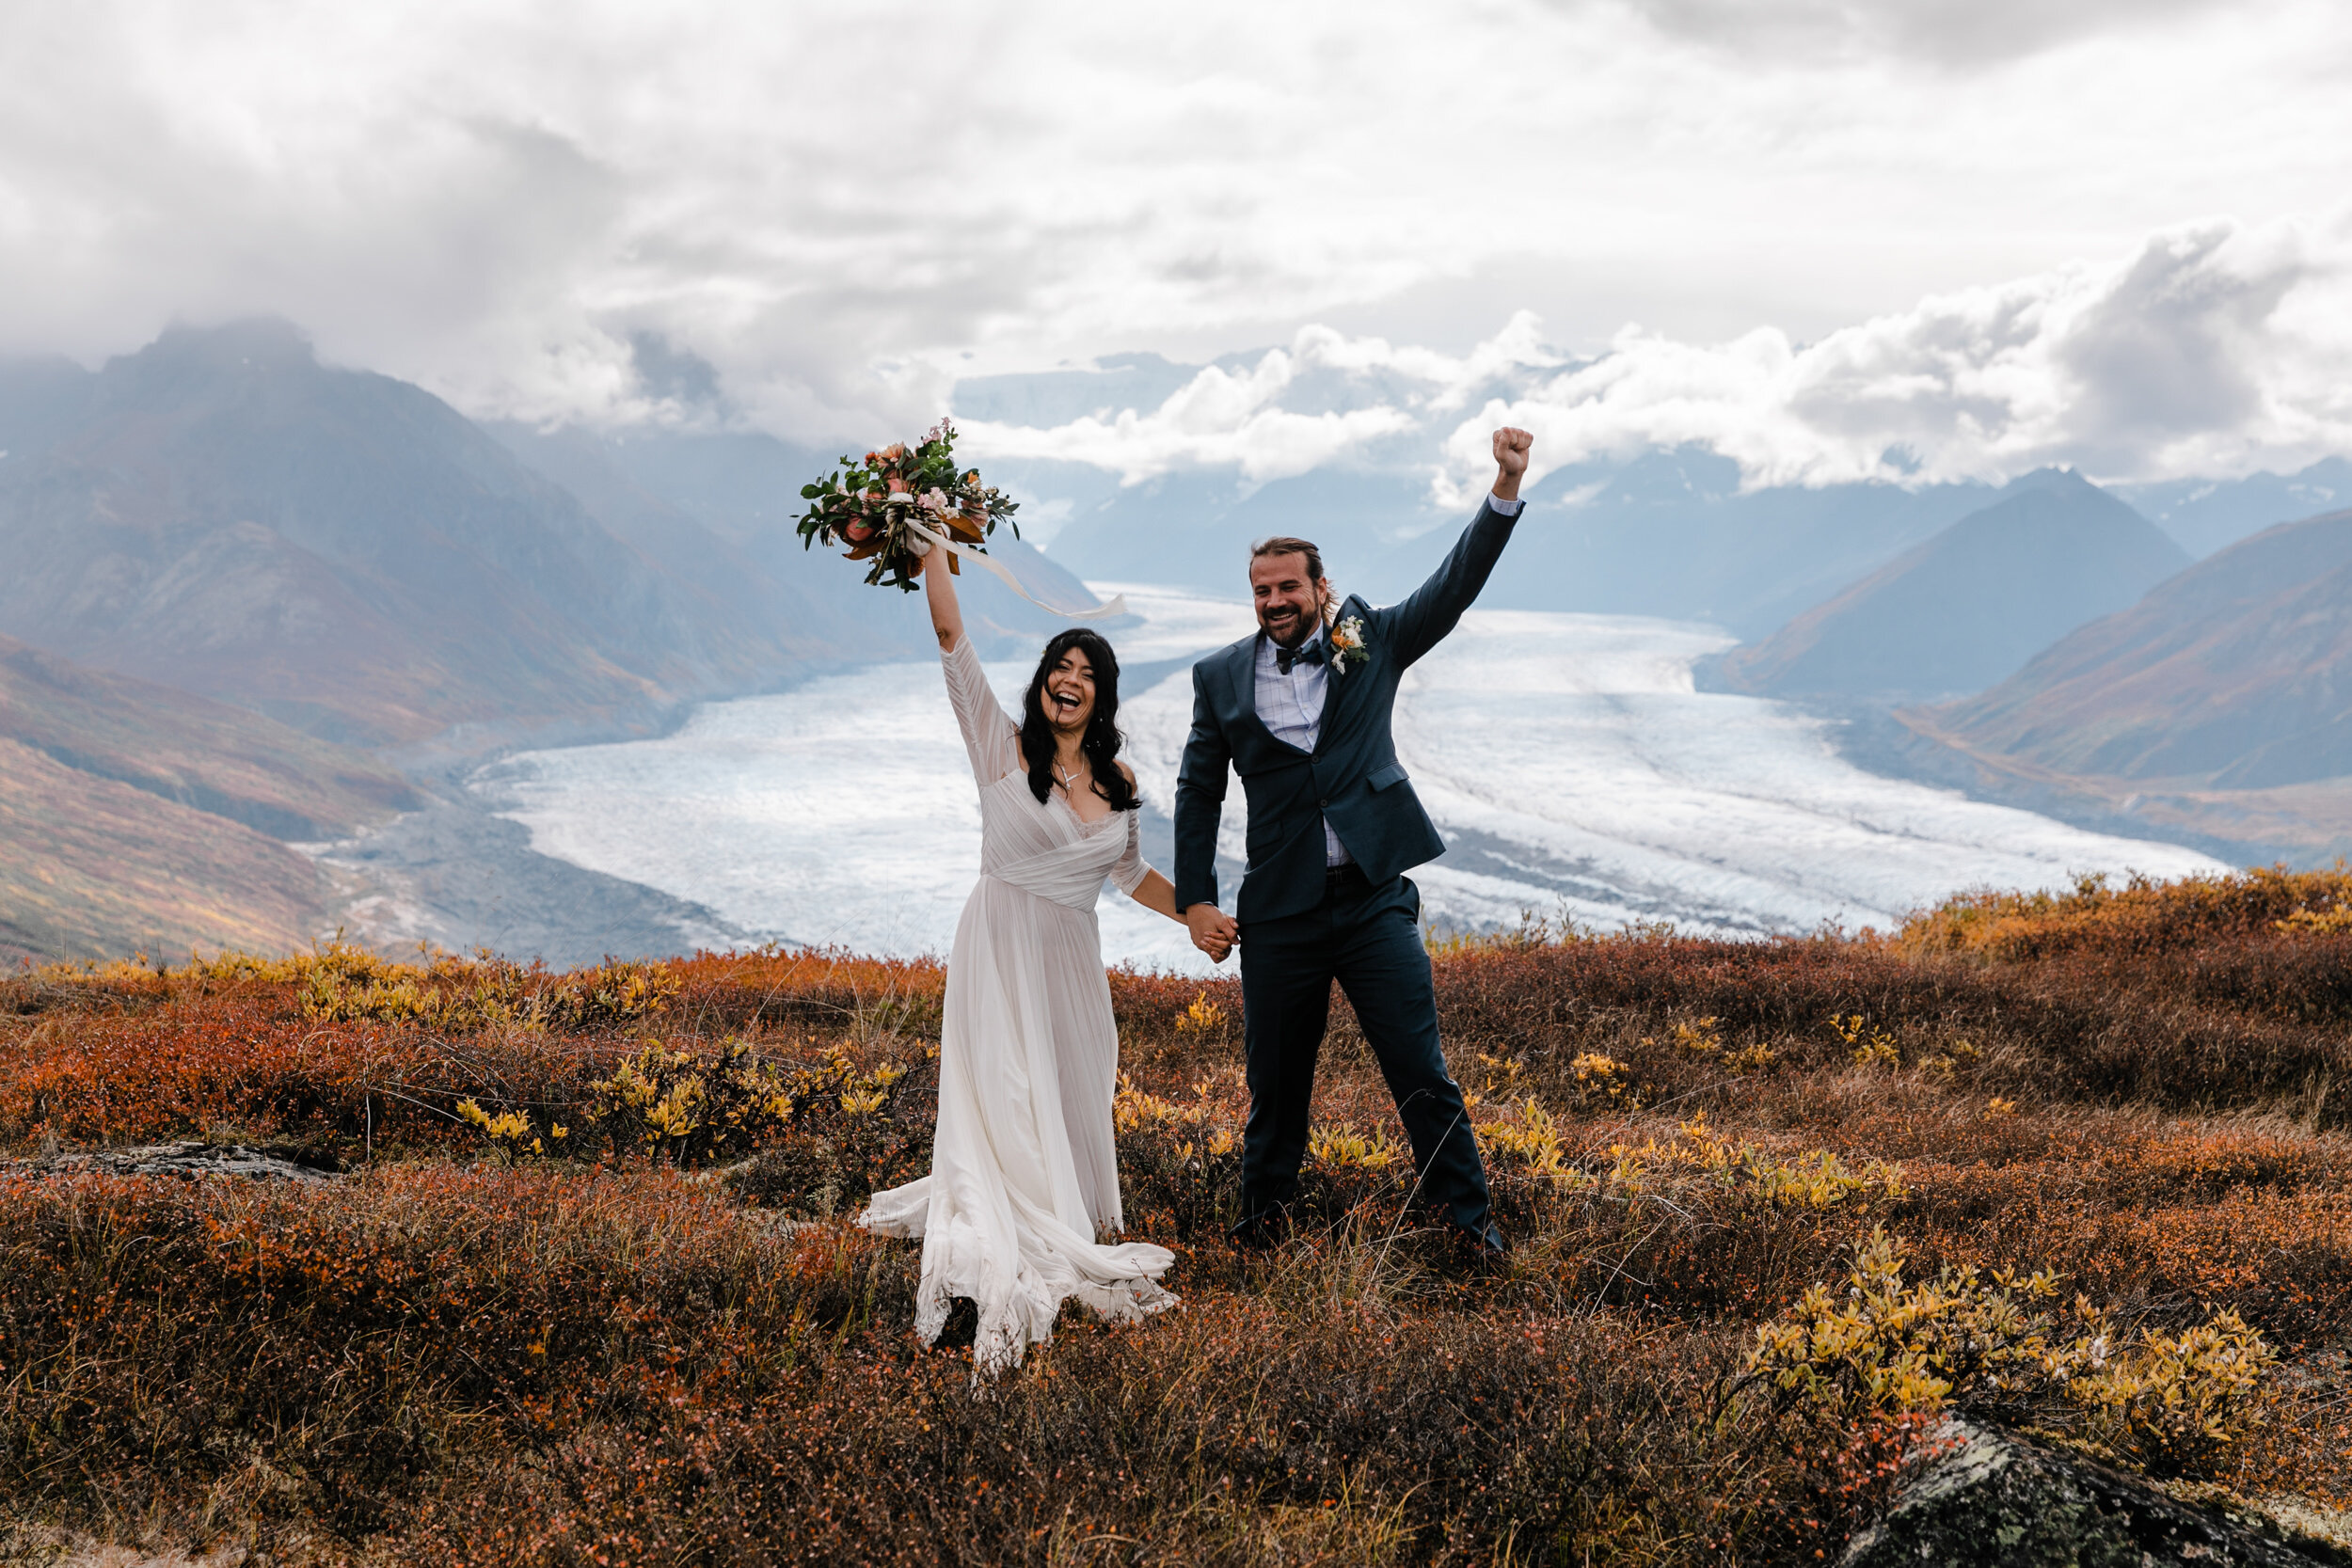 Intimate Elopement | Fall Colors in Alaska | The Hearnes Photography